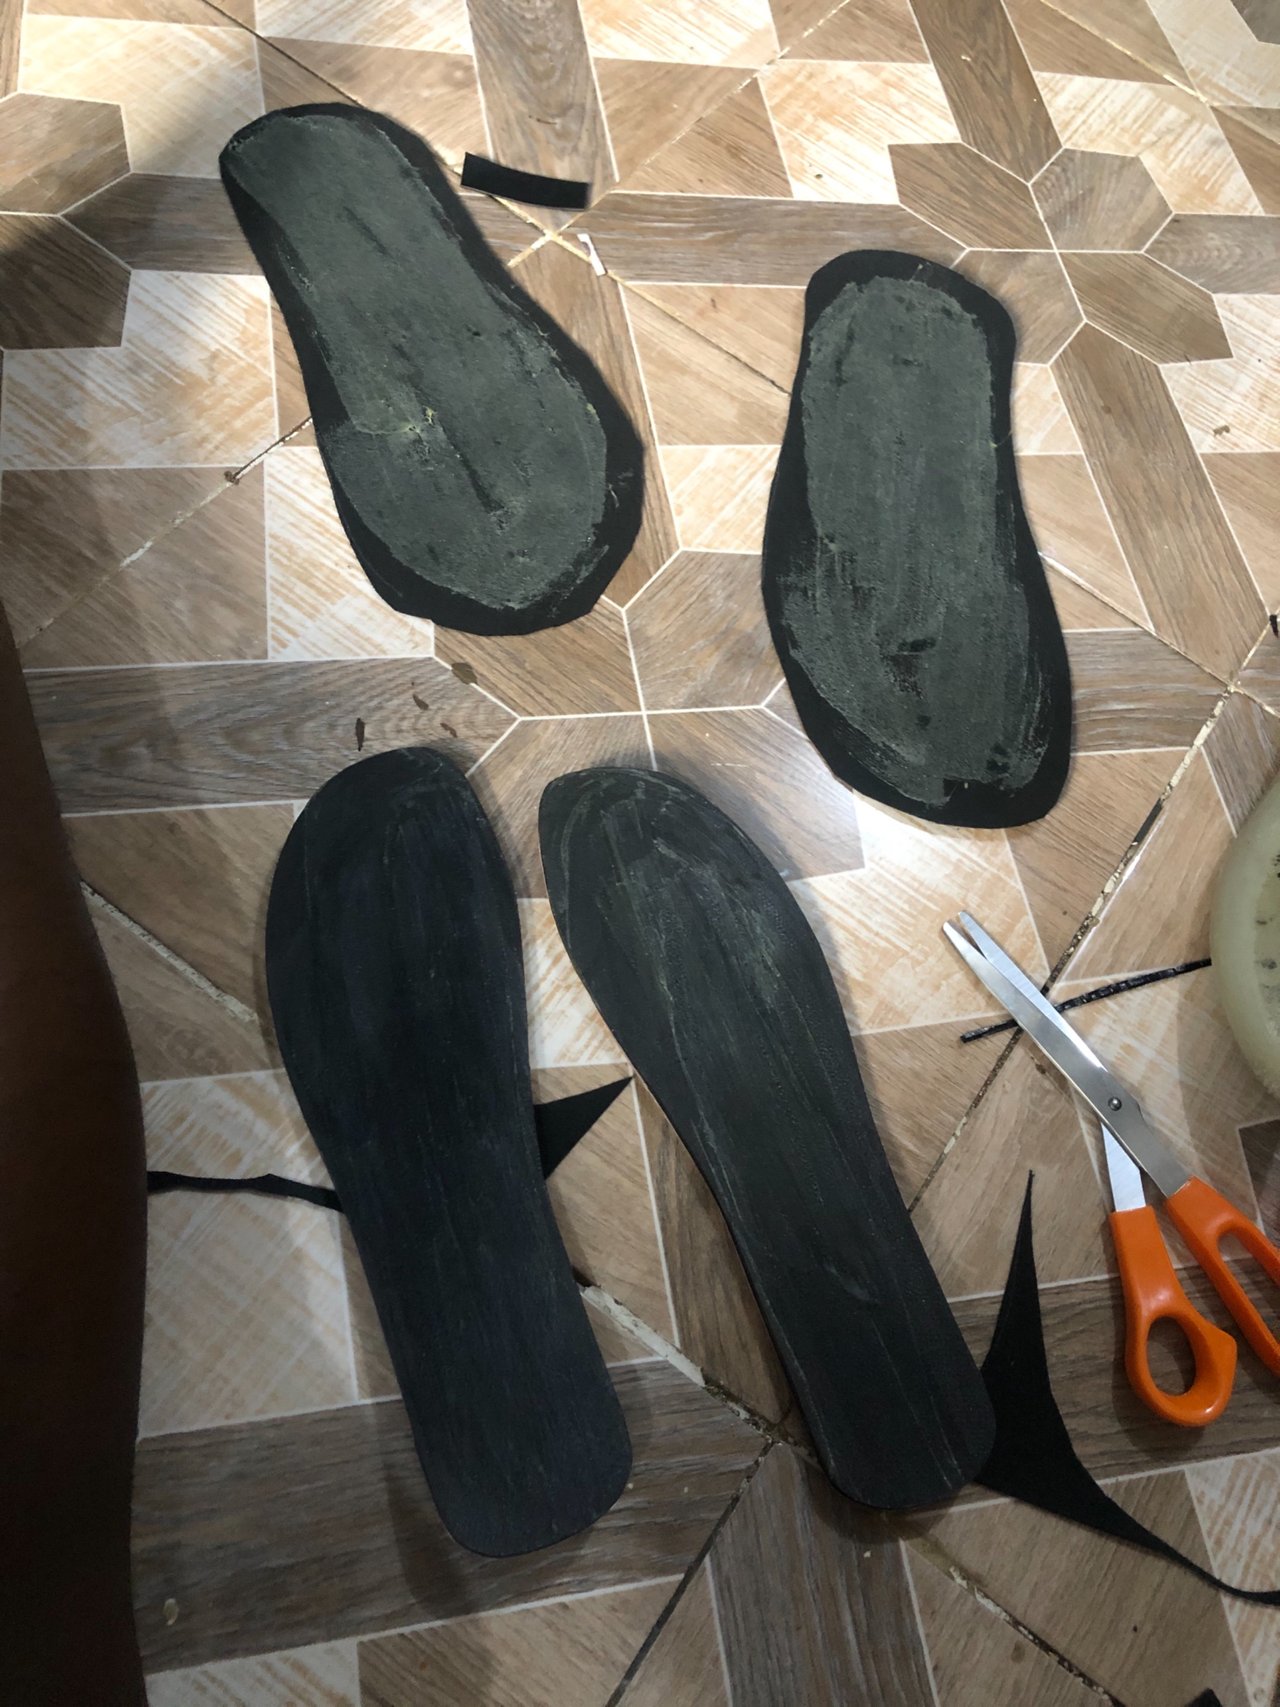 Farooq on X: Perfectly made palm slippers ‚made out of authentic